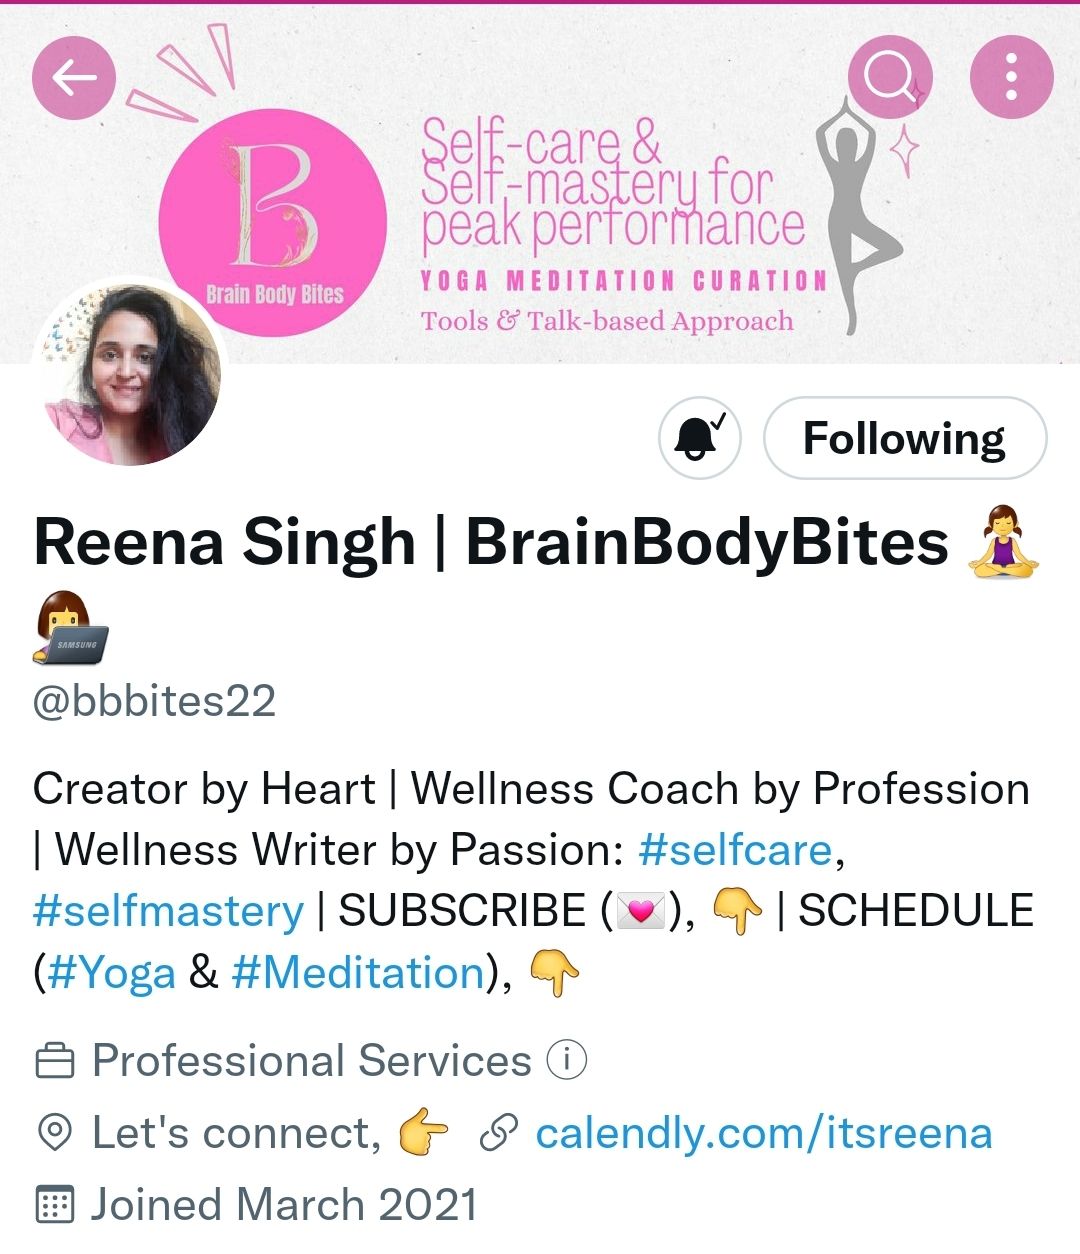 Follow my Twitter handle for threads on self-care & self-mastery. 